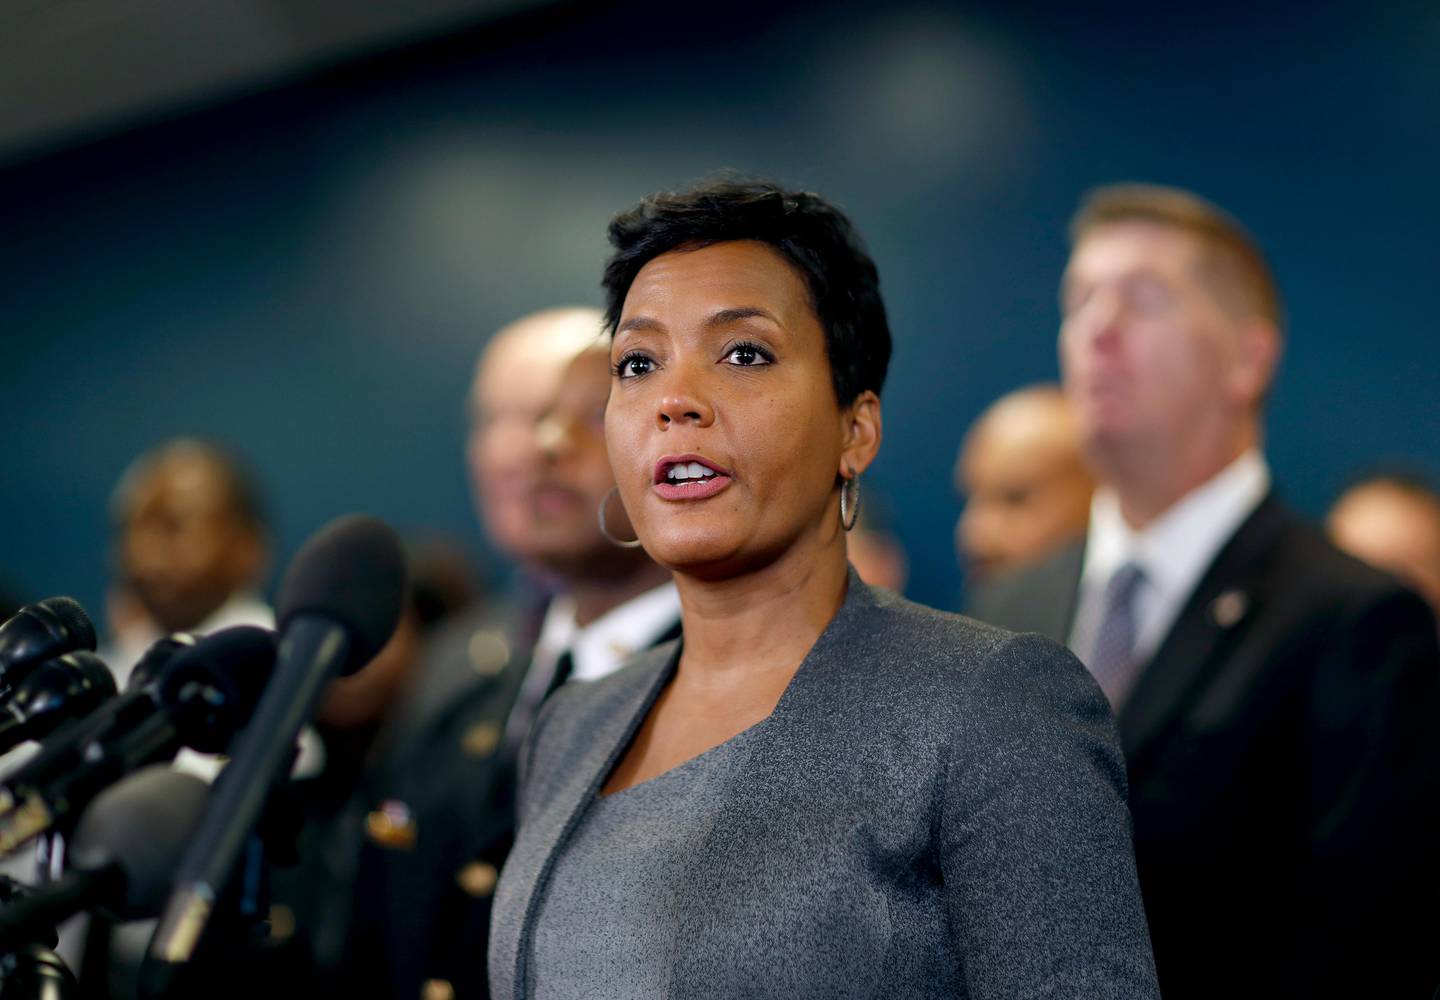 FILE - In this Jan. 4, 2018, file photo, Mayor Keisha Lance Bottoms speaks at a press conference in Atlanta. In Georgia, black women will likely factor into one of the country?Äôs marquee political contests. The Democratic race for governor features two women, and candidate Stacey Abrams is running to become the first black woman ever elected governor in America. Bottoms hasn't officially endorsed a candidate in the gubernatorial race but counted Stacey Evans among her supporters. She said she feels compelled to help empower other women, especially black women. (AP Photo/David Goldman, File)